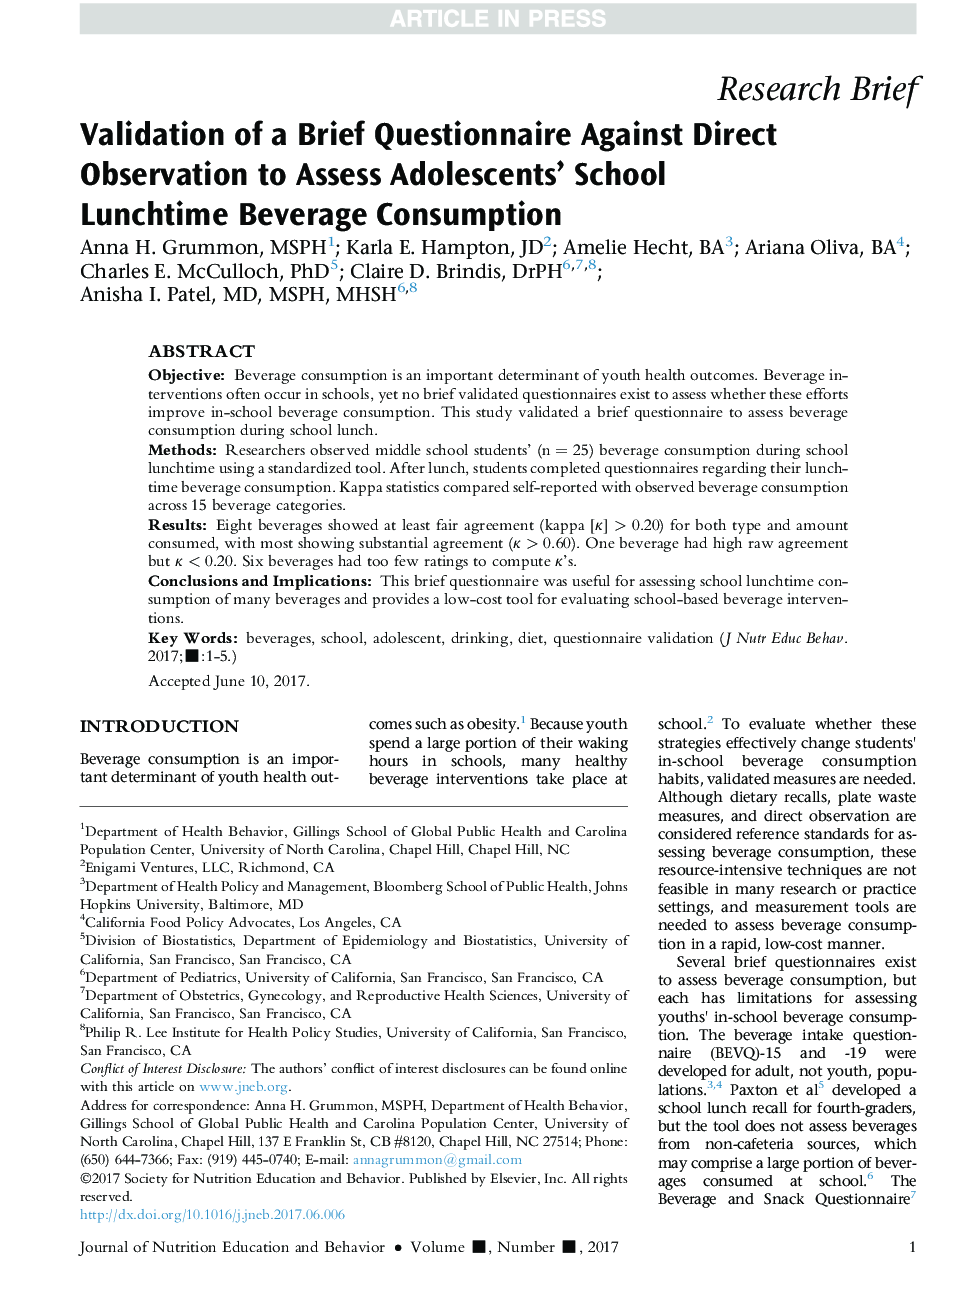 Validation of a Brief Questionnaire Against Direct Observation to Assess Adolescents' School Lunchtime Beverage Consumption